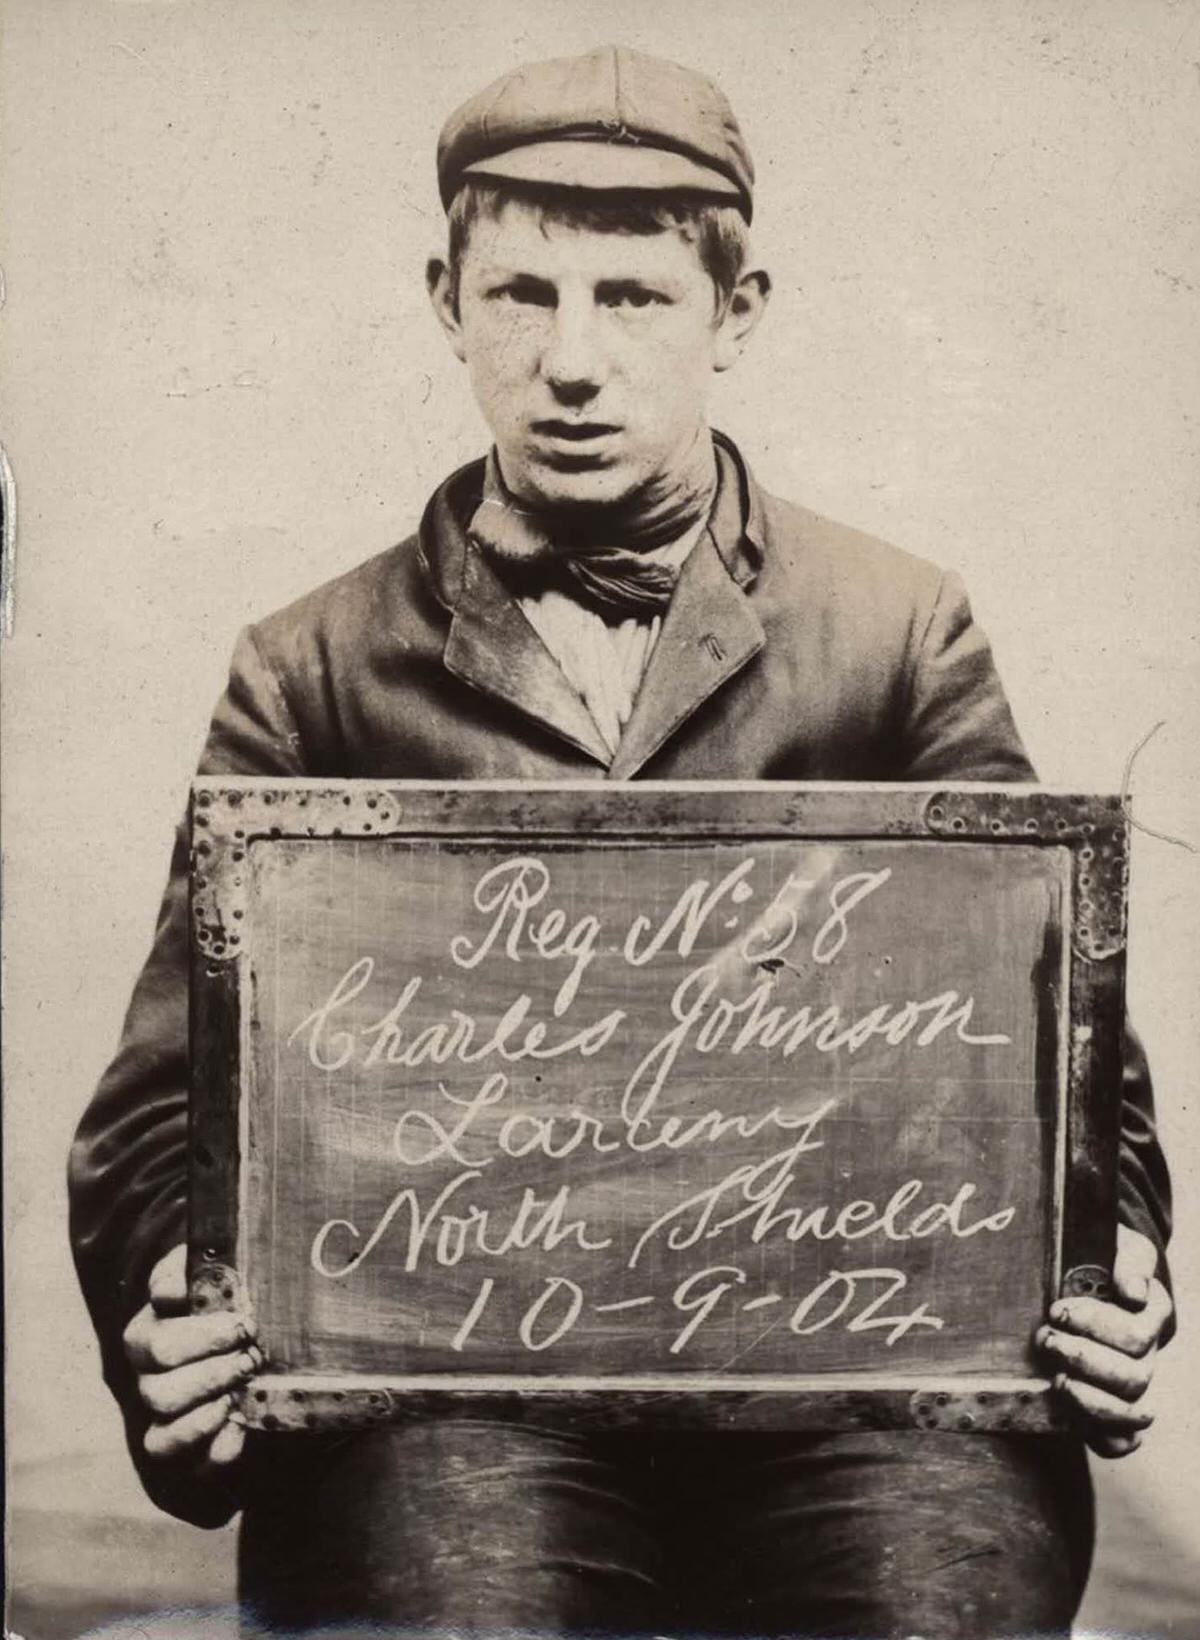 Charles Johnson, age unknown, arrested for stealing sash weights, 1904.